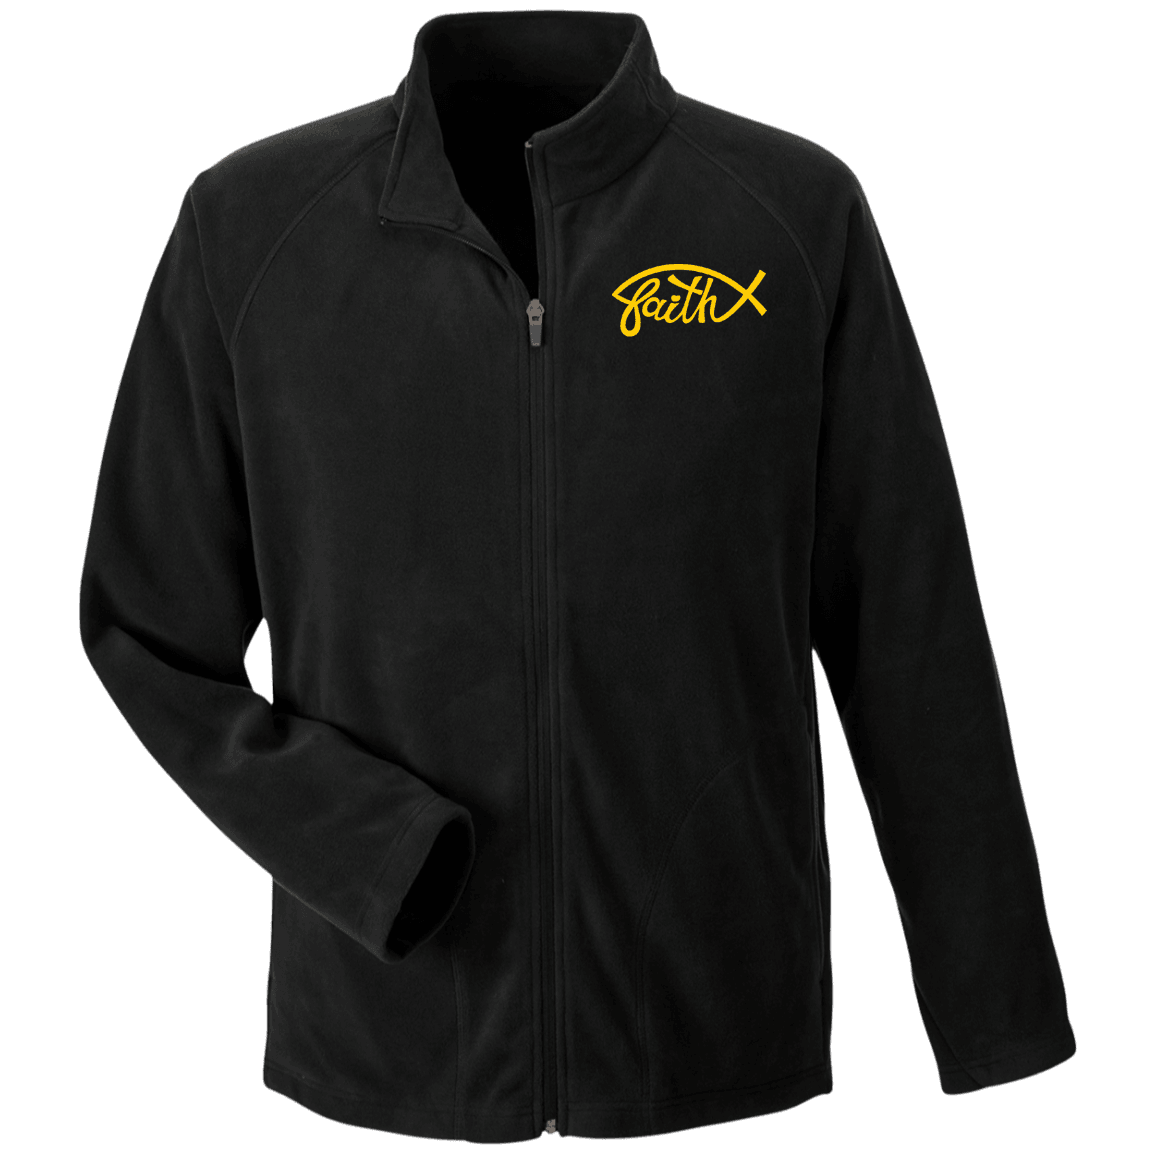 Designs by MyUtopia Shout Out:Faith Fish Embroidered Team 365 Microfleece Unisex Jacket - Black,Black / X-Small,Jackets